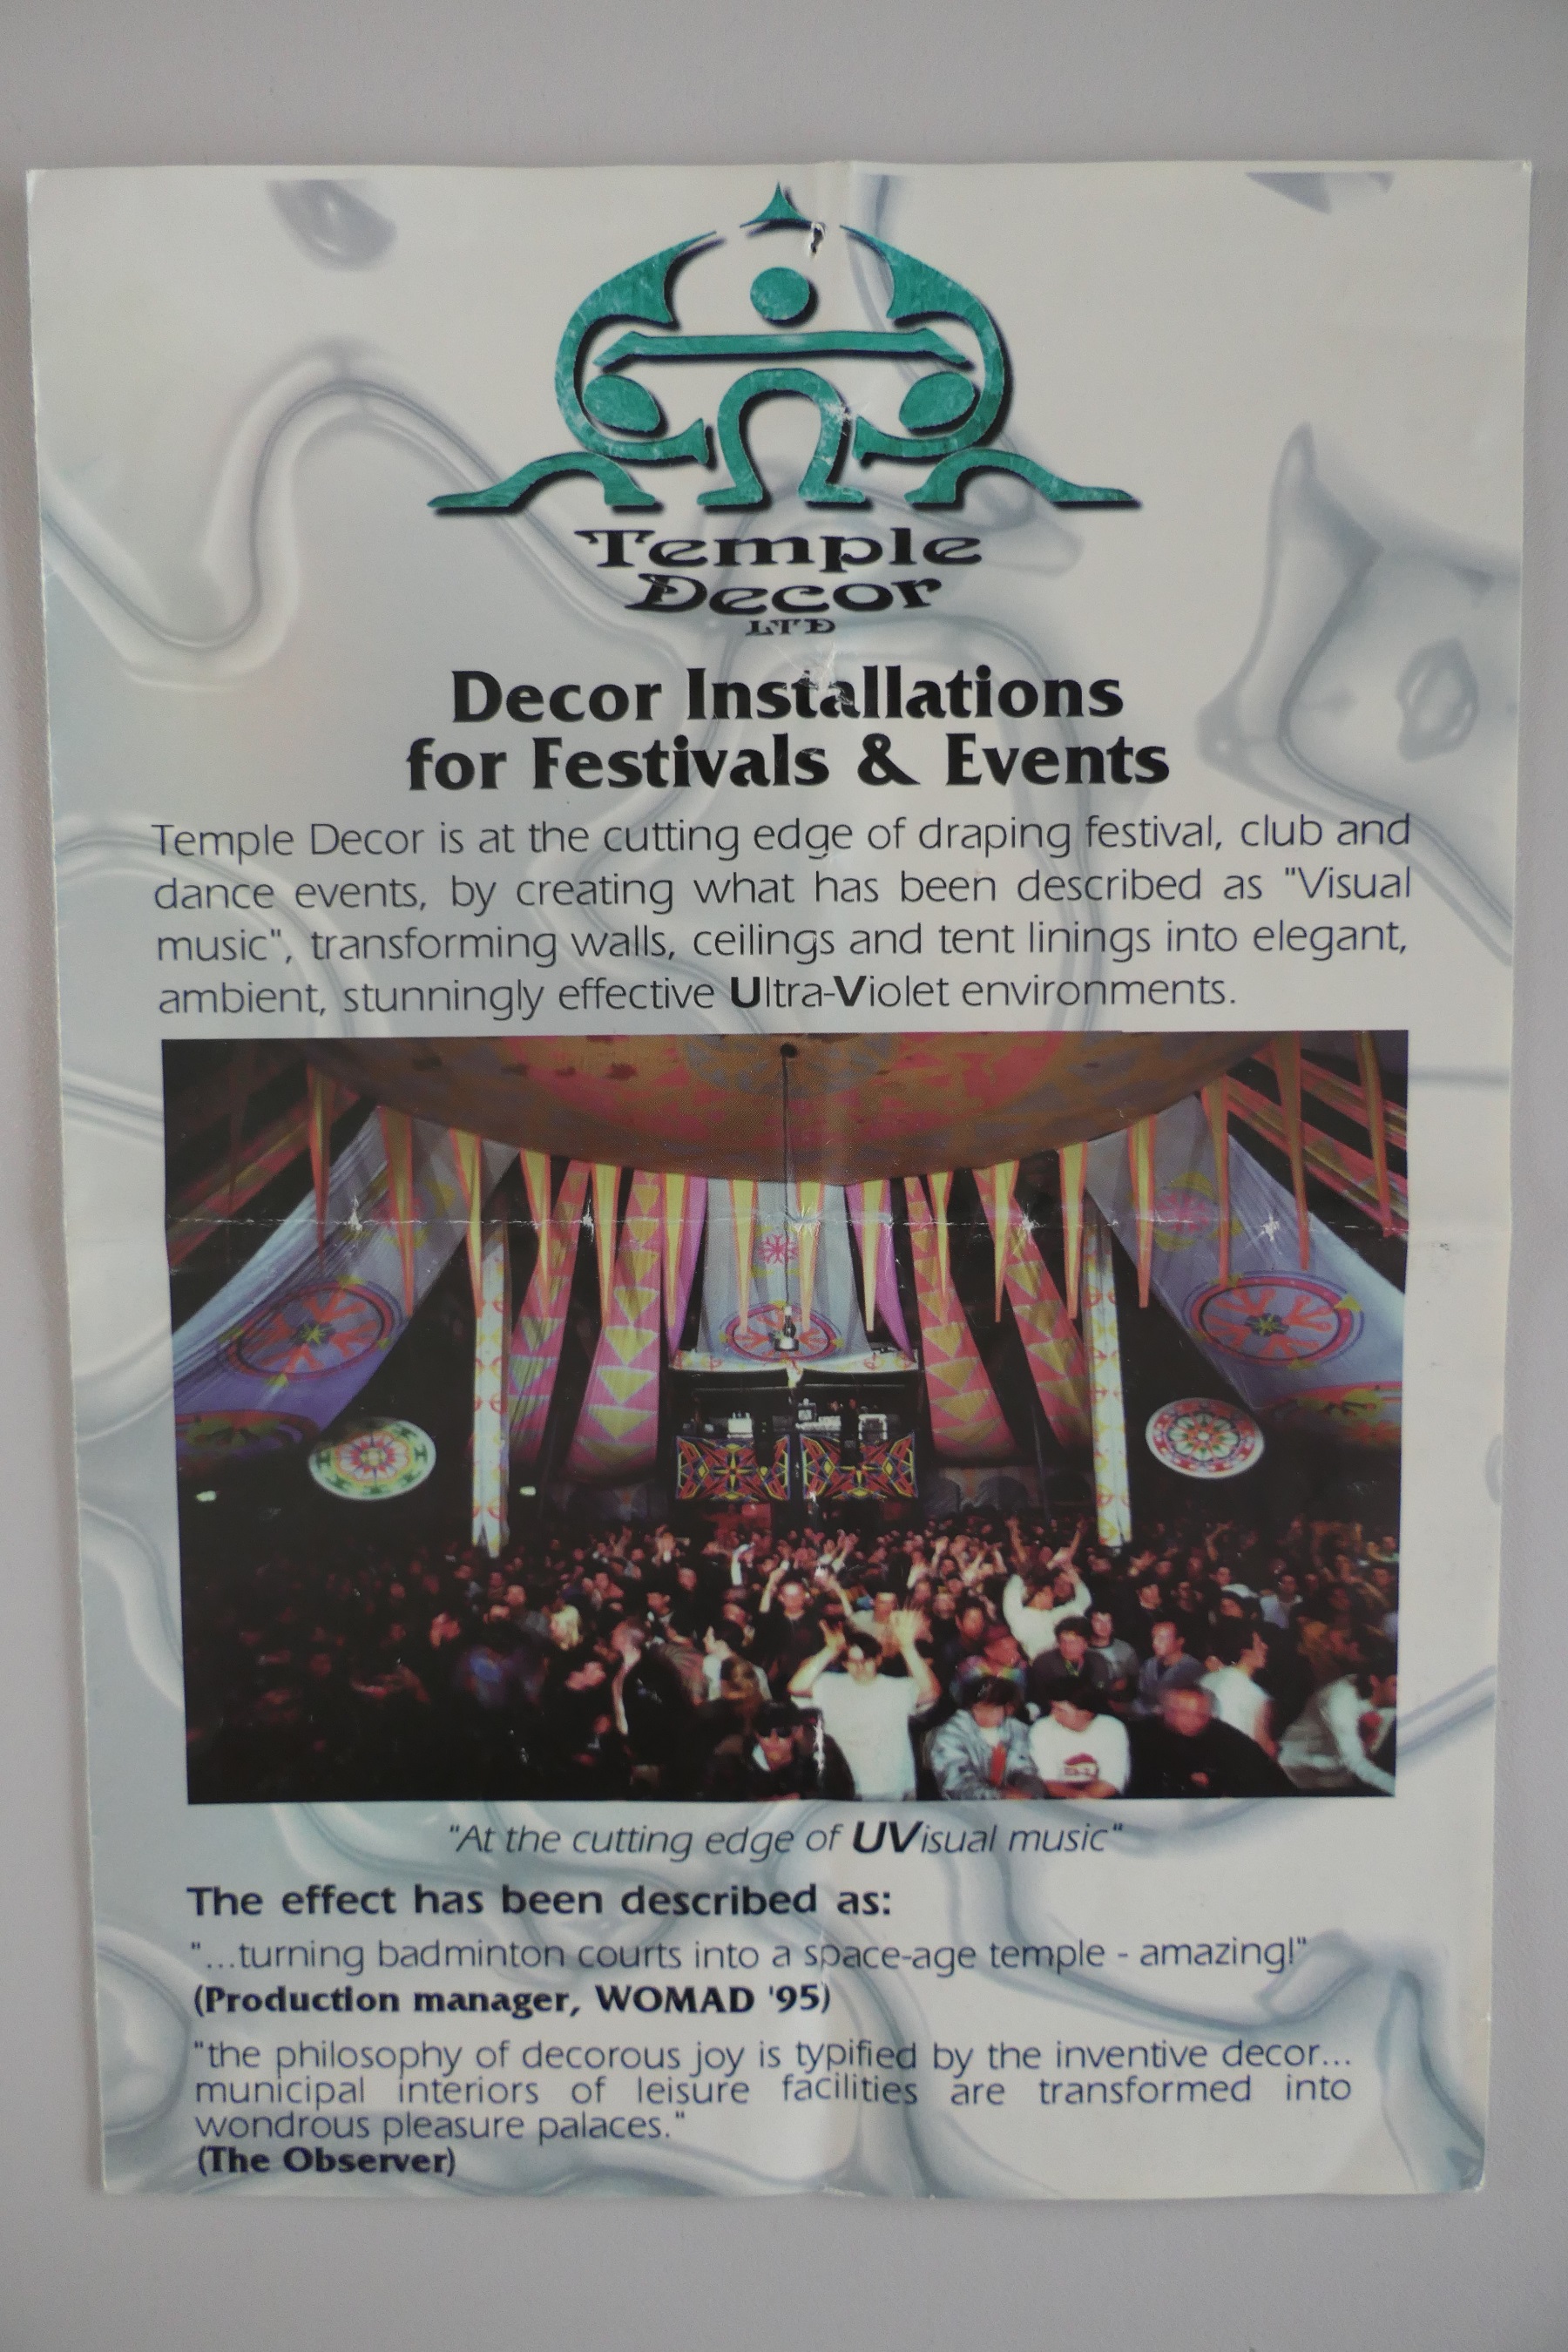 Leaflet for Temple Décor Ltd reads: Décor Installations for Festivals & Events' with image of a festival tent with drapes